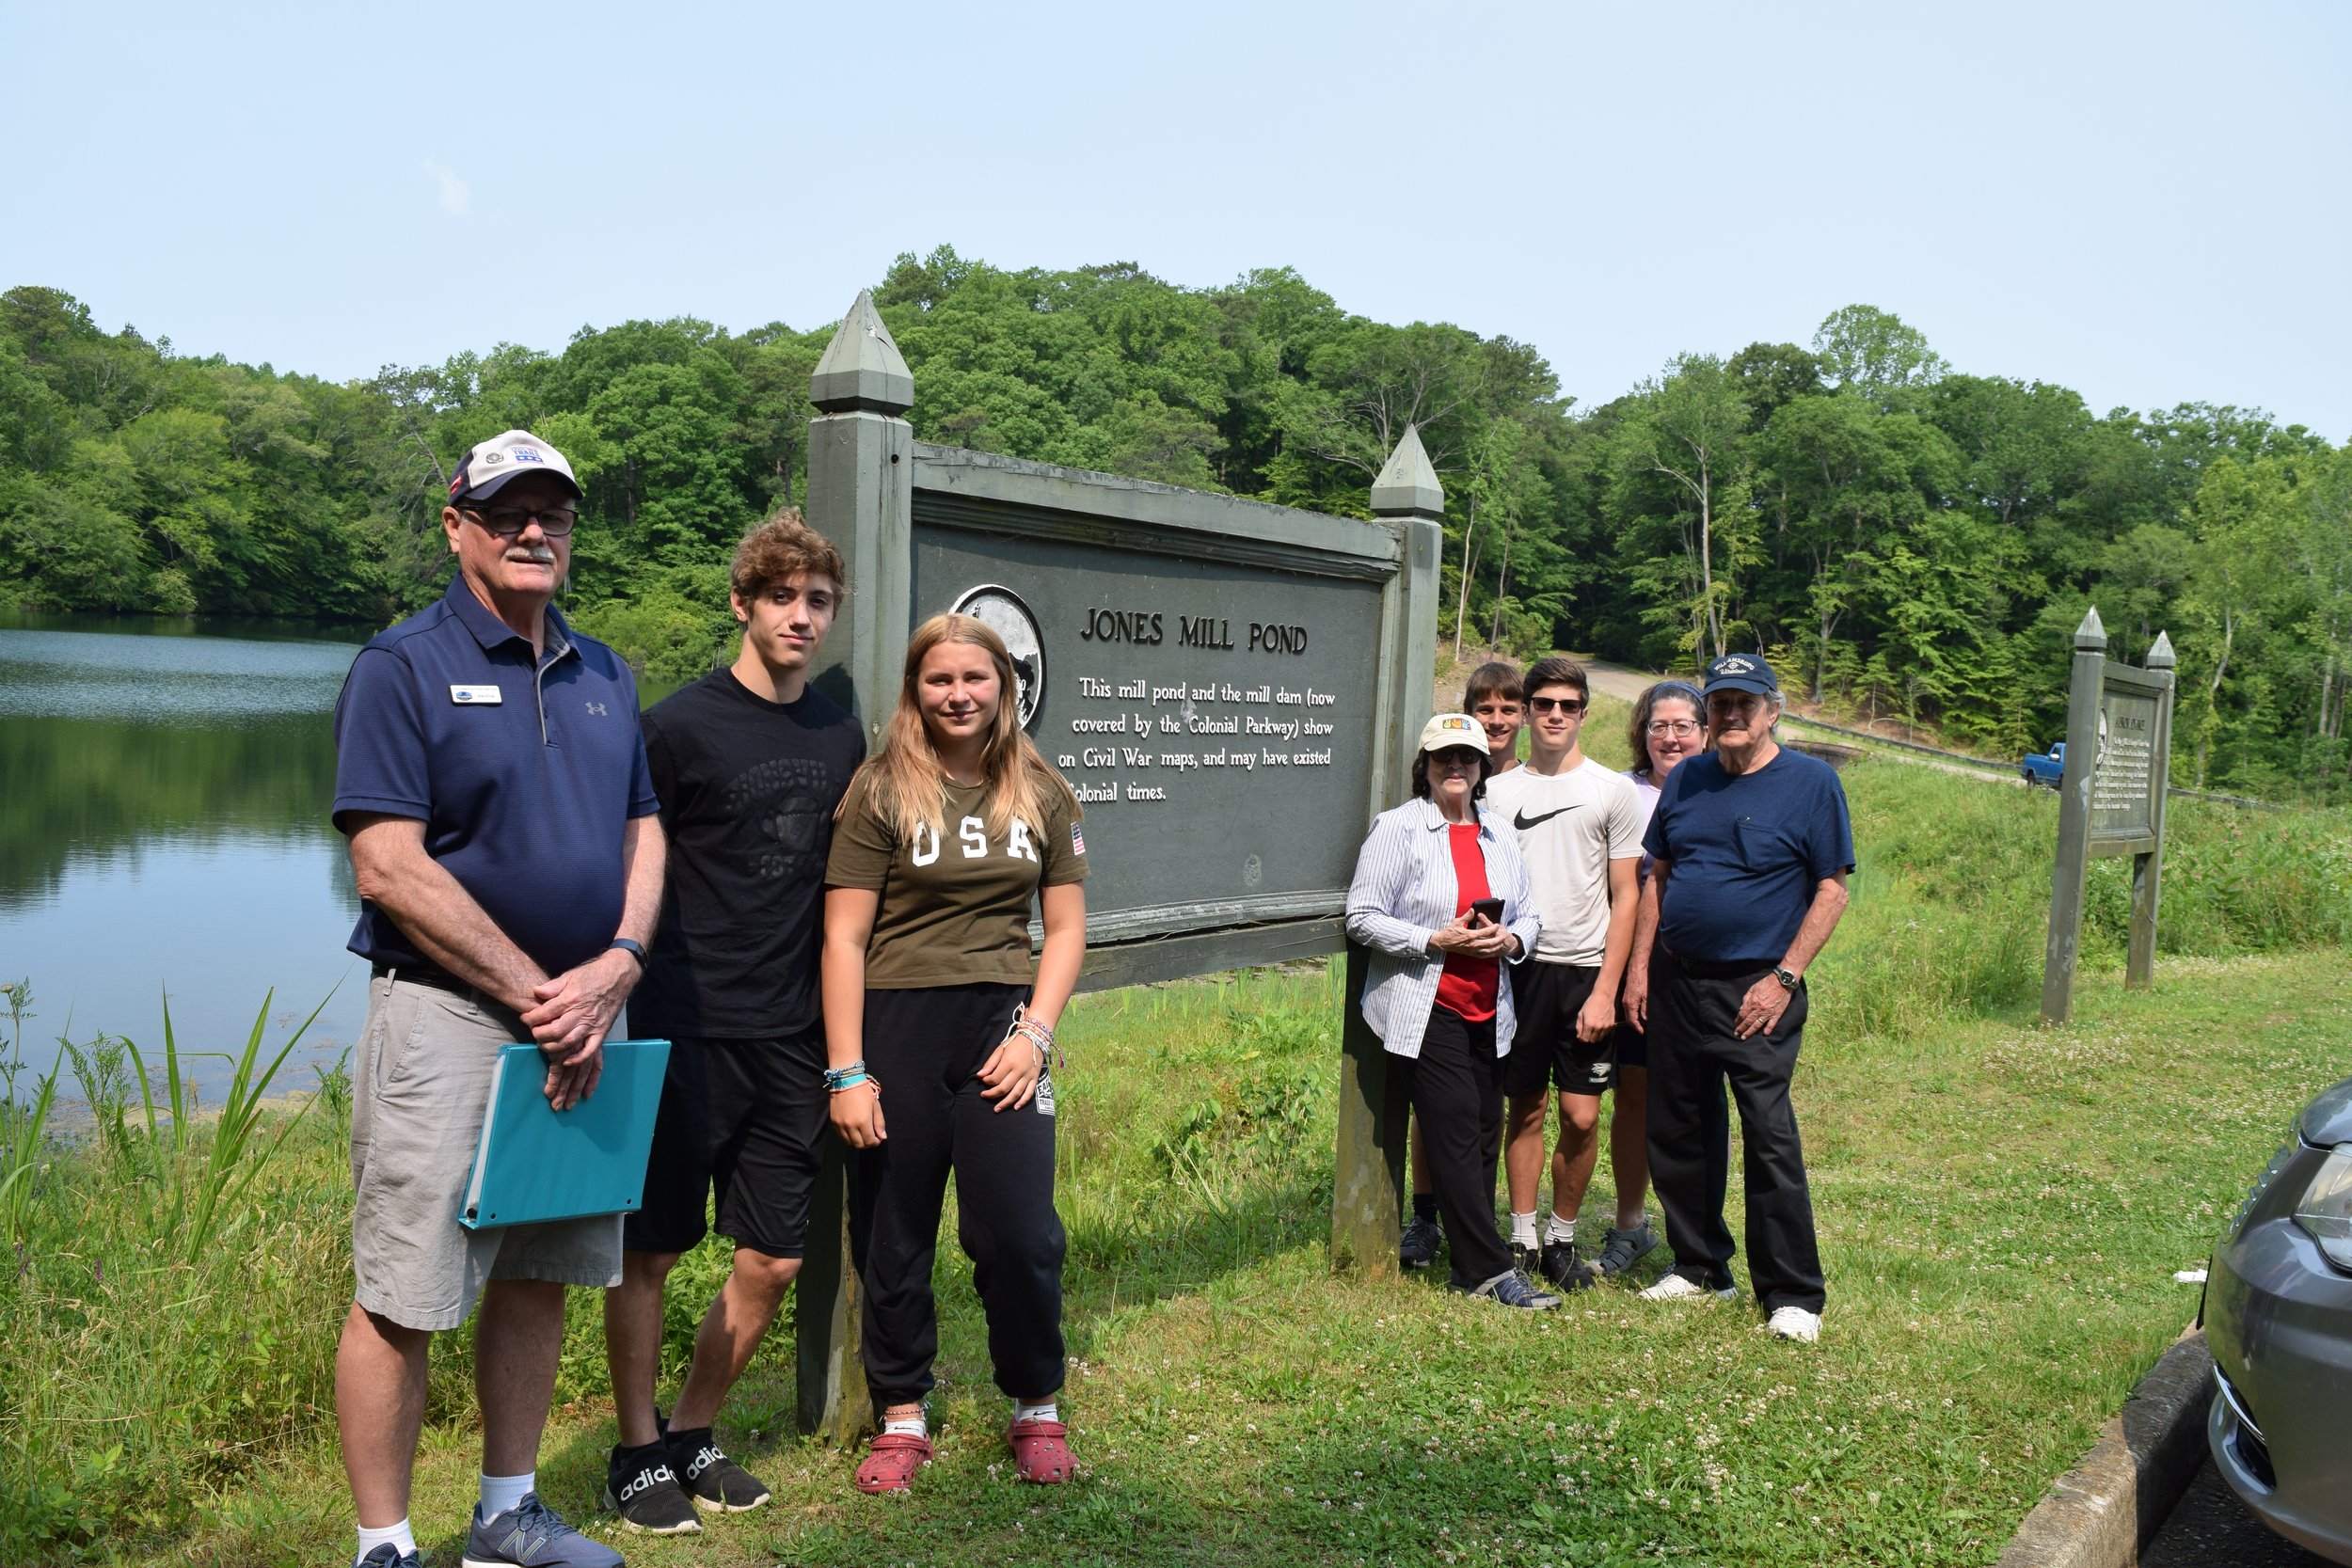 WBA Director Don Kline with Deb and her husband, daughter, and grandchildren at Jones Mill Pond off of the Colonial Parkway (photo June 2023 by Amy Parker, WBA)